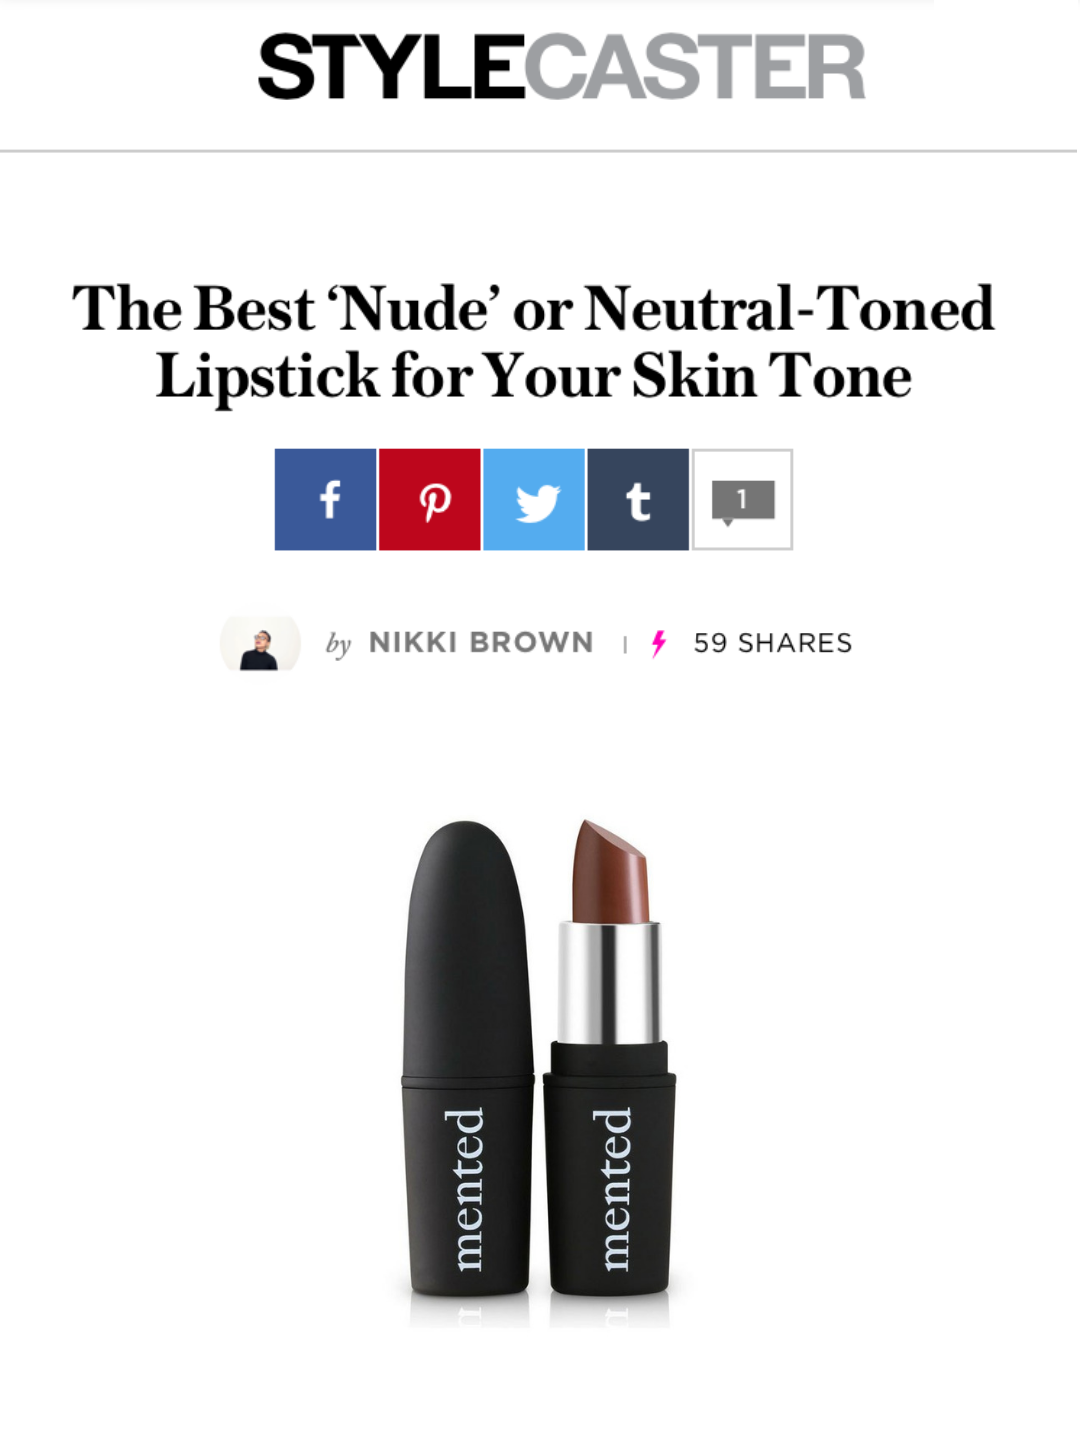 The Best "Nude" or Neutral-Toned Lipstick for Your Skin Tone